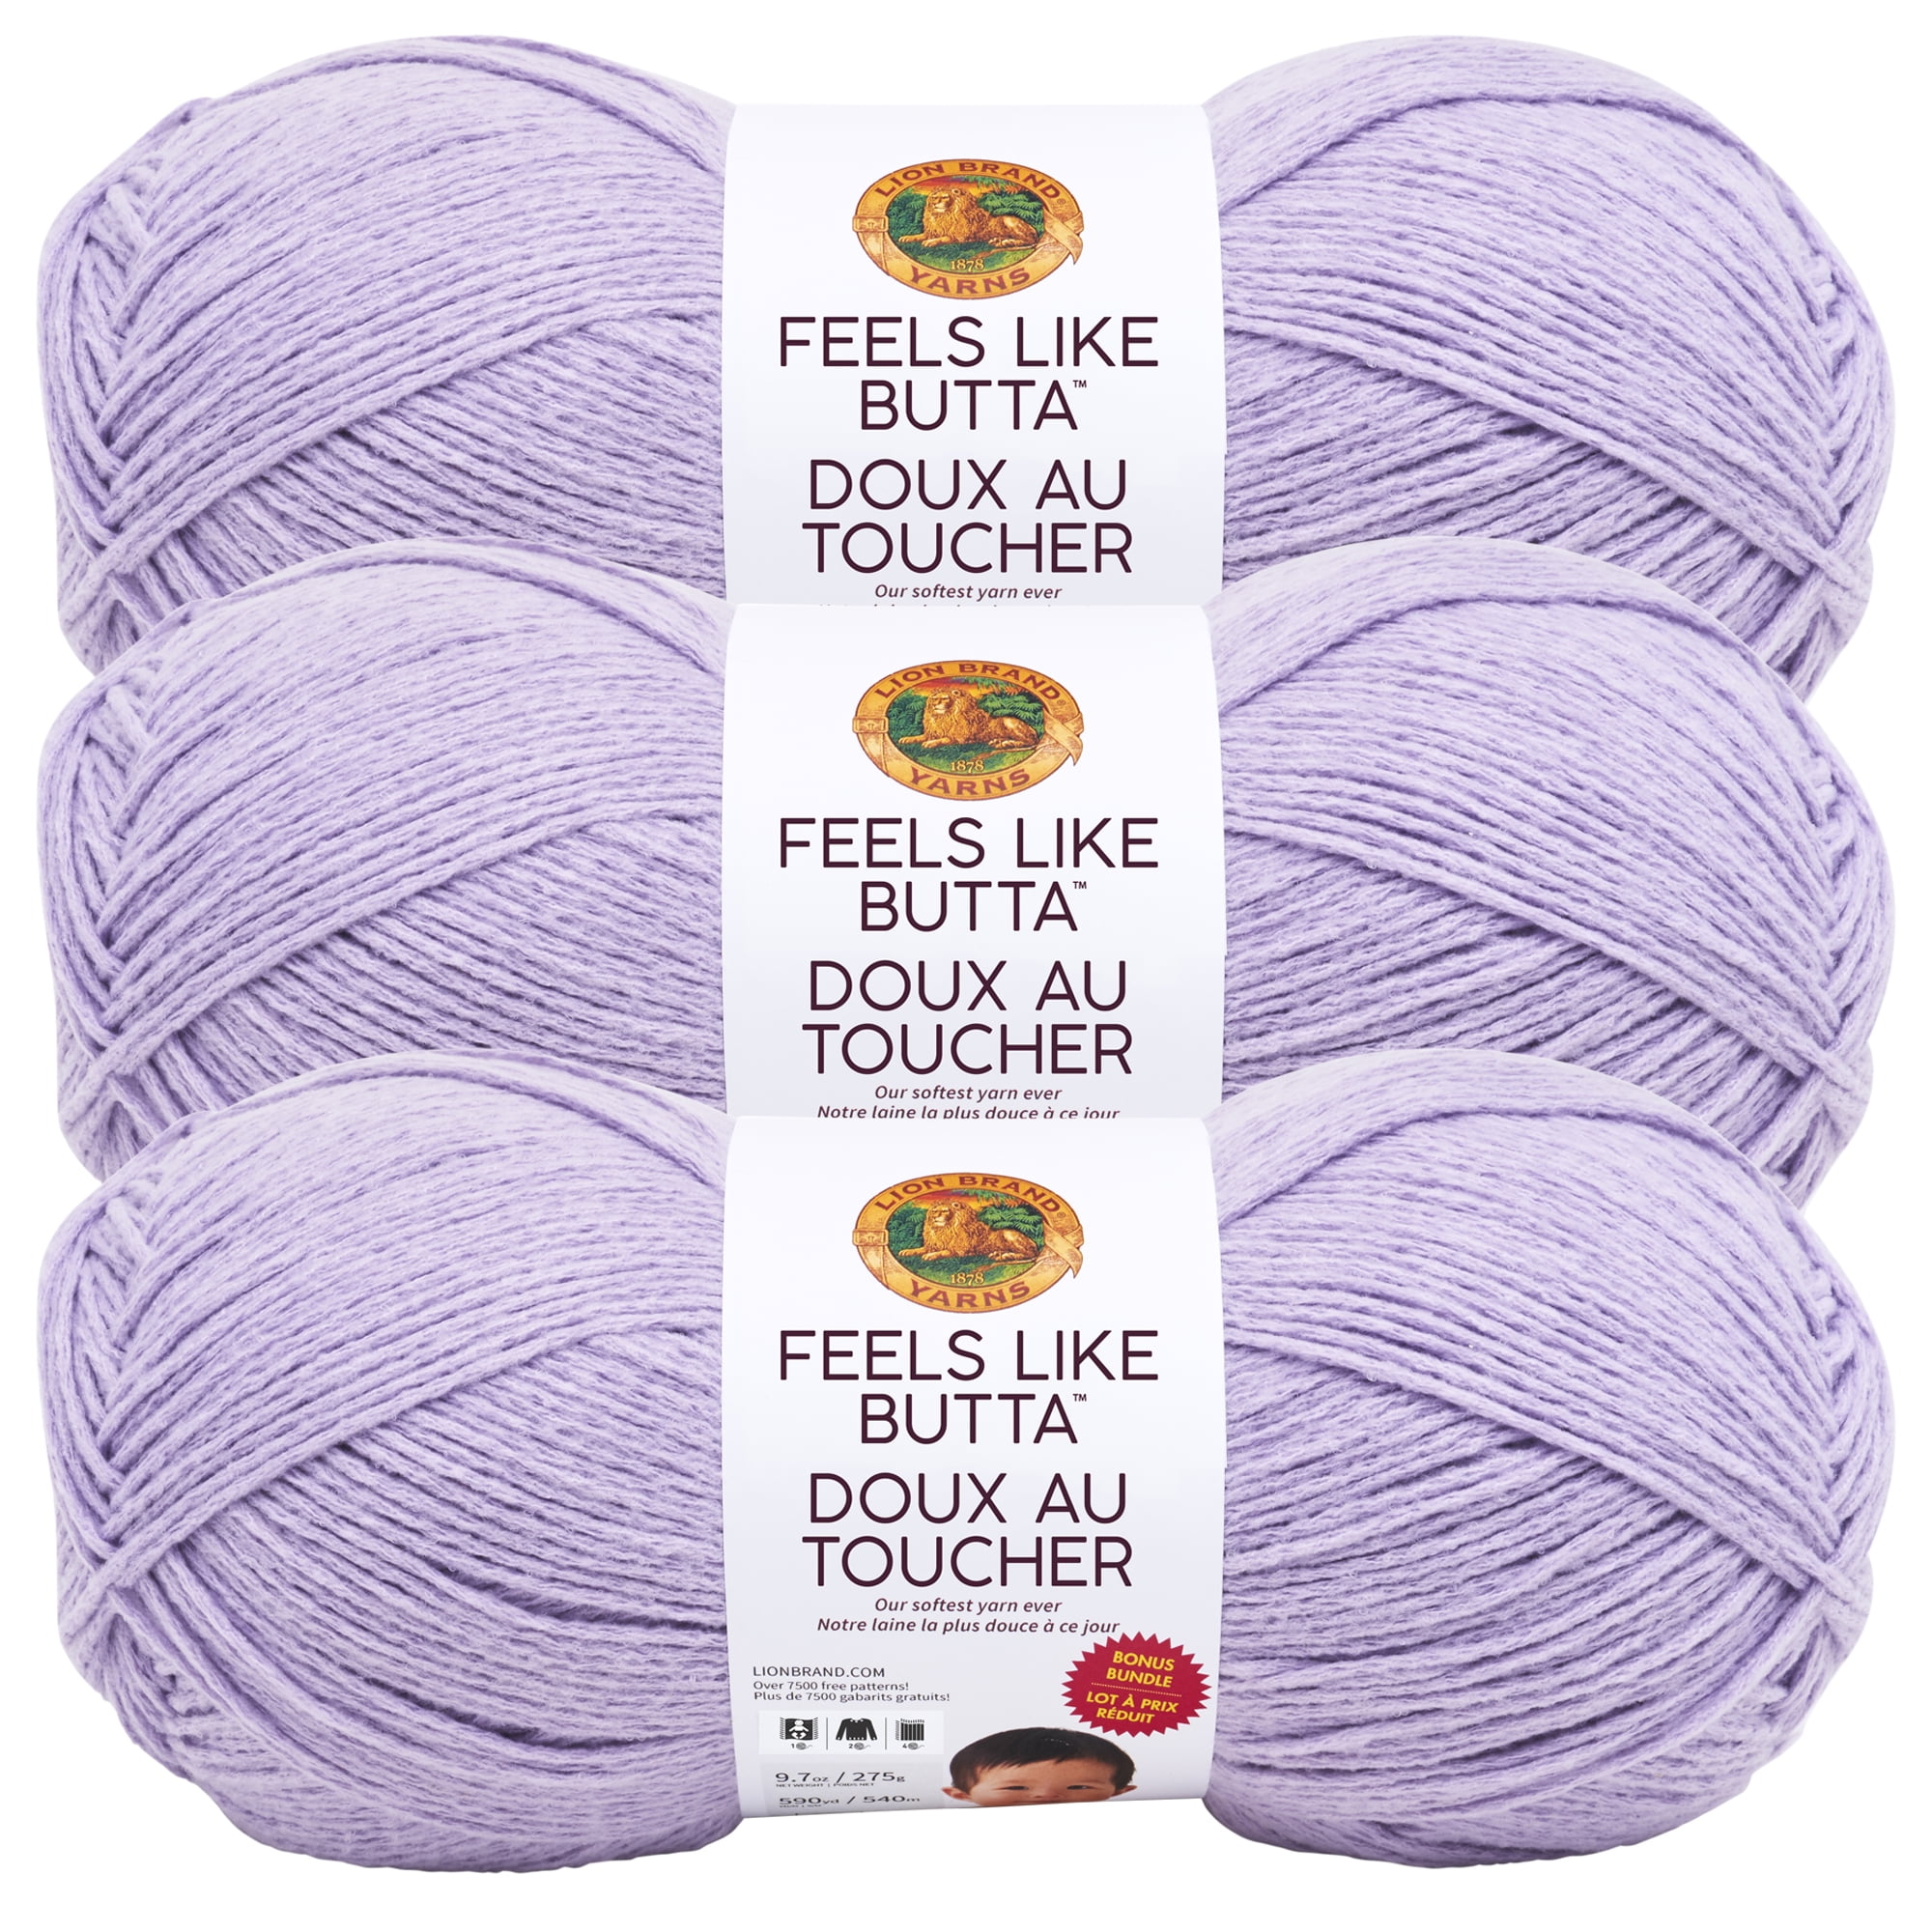 Lion Brand Yarn - Have you tried Feels Like Butta yarn yet? It's one of our  favorites! Here's a crochet roundup of 5 patterns for some inspiration >>